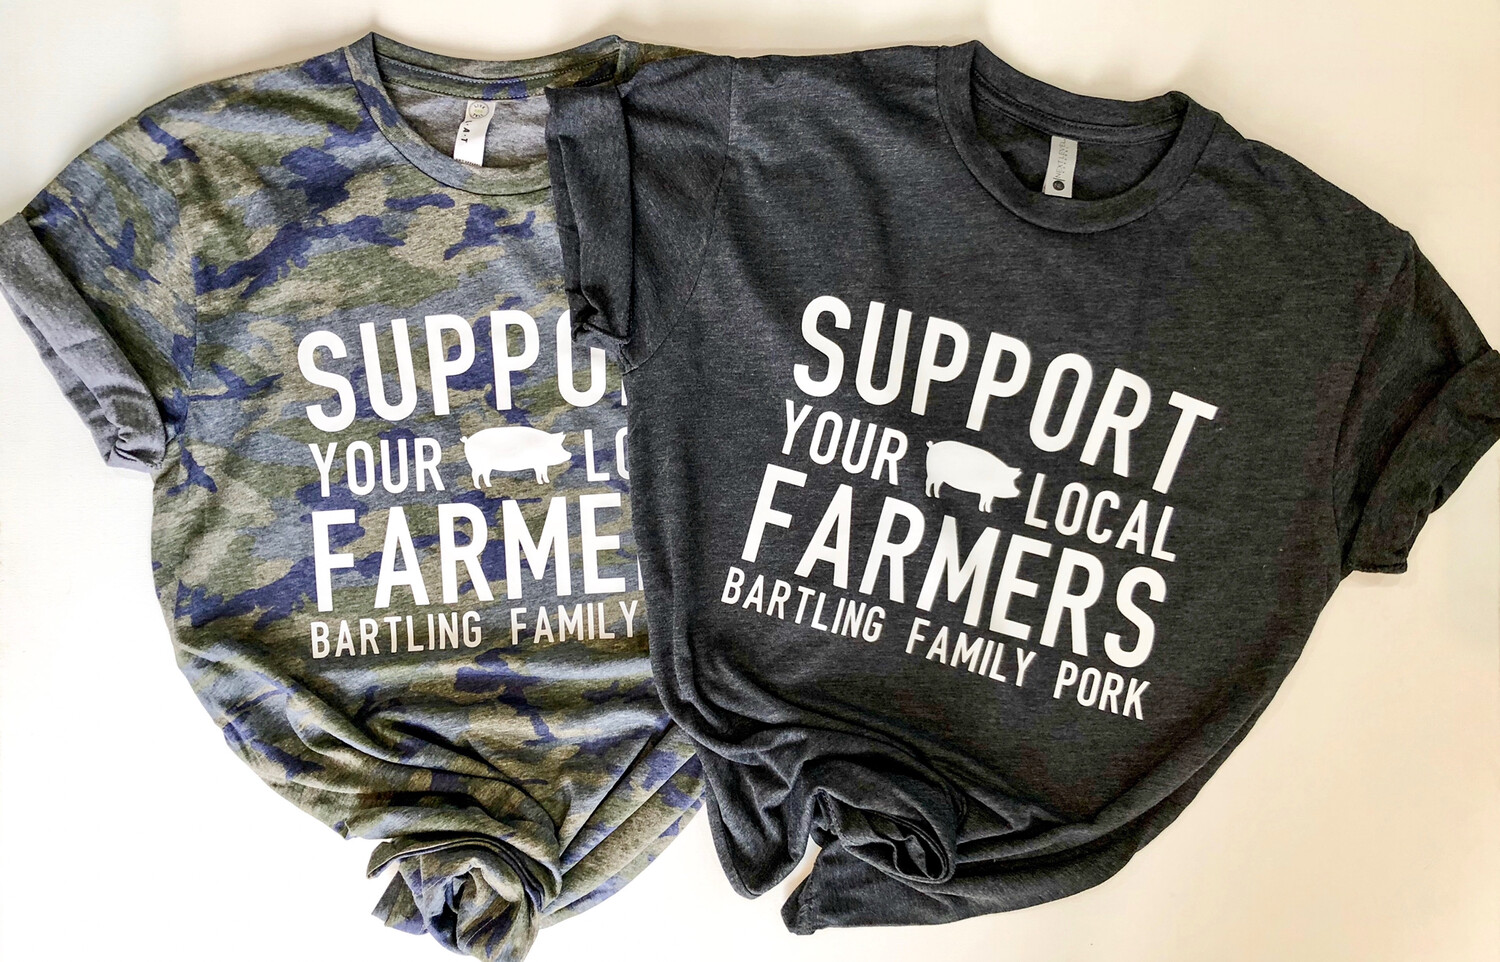 “Support Your Local Farmers” T-shirt